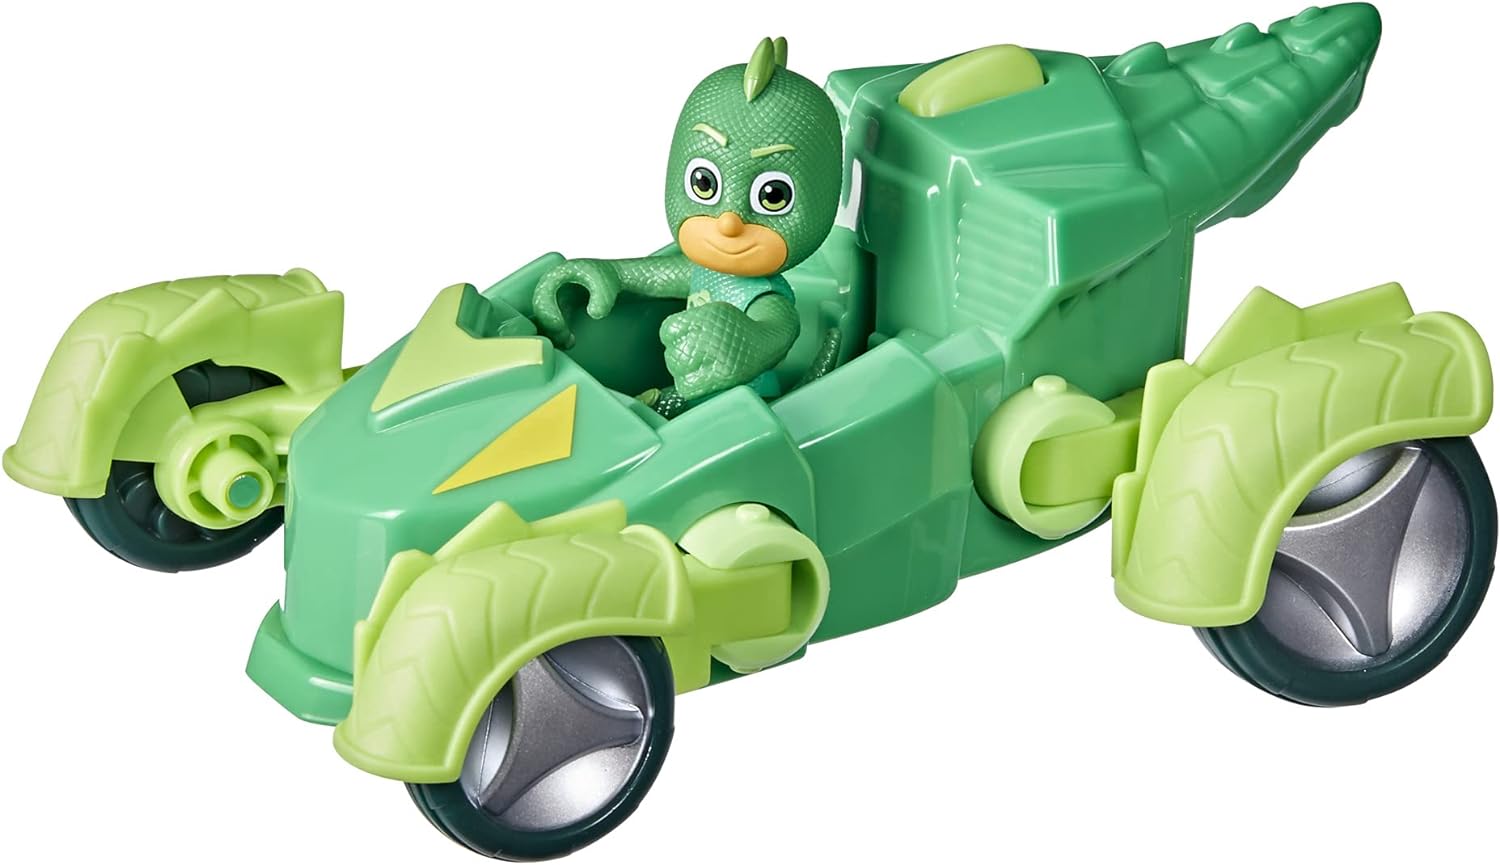 PJ Masks Gekko Deluxe Vehicle Preschool Toy, Gekko-Mobile Car with 2 Wheel Modes and Gekko Action Figure for Kids Ages 3 and Up